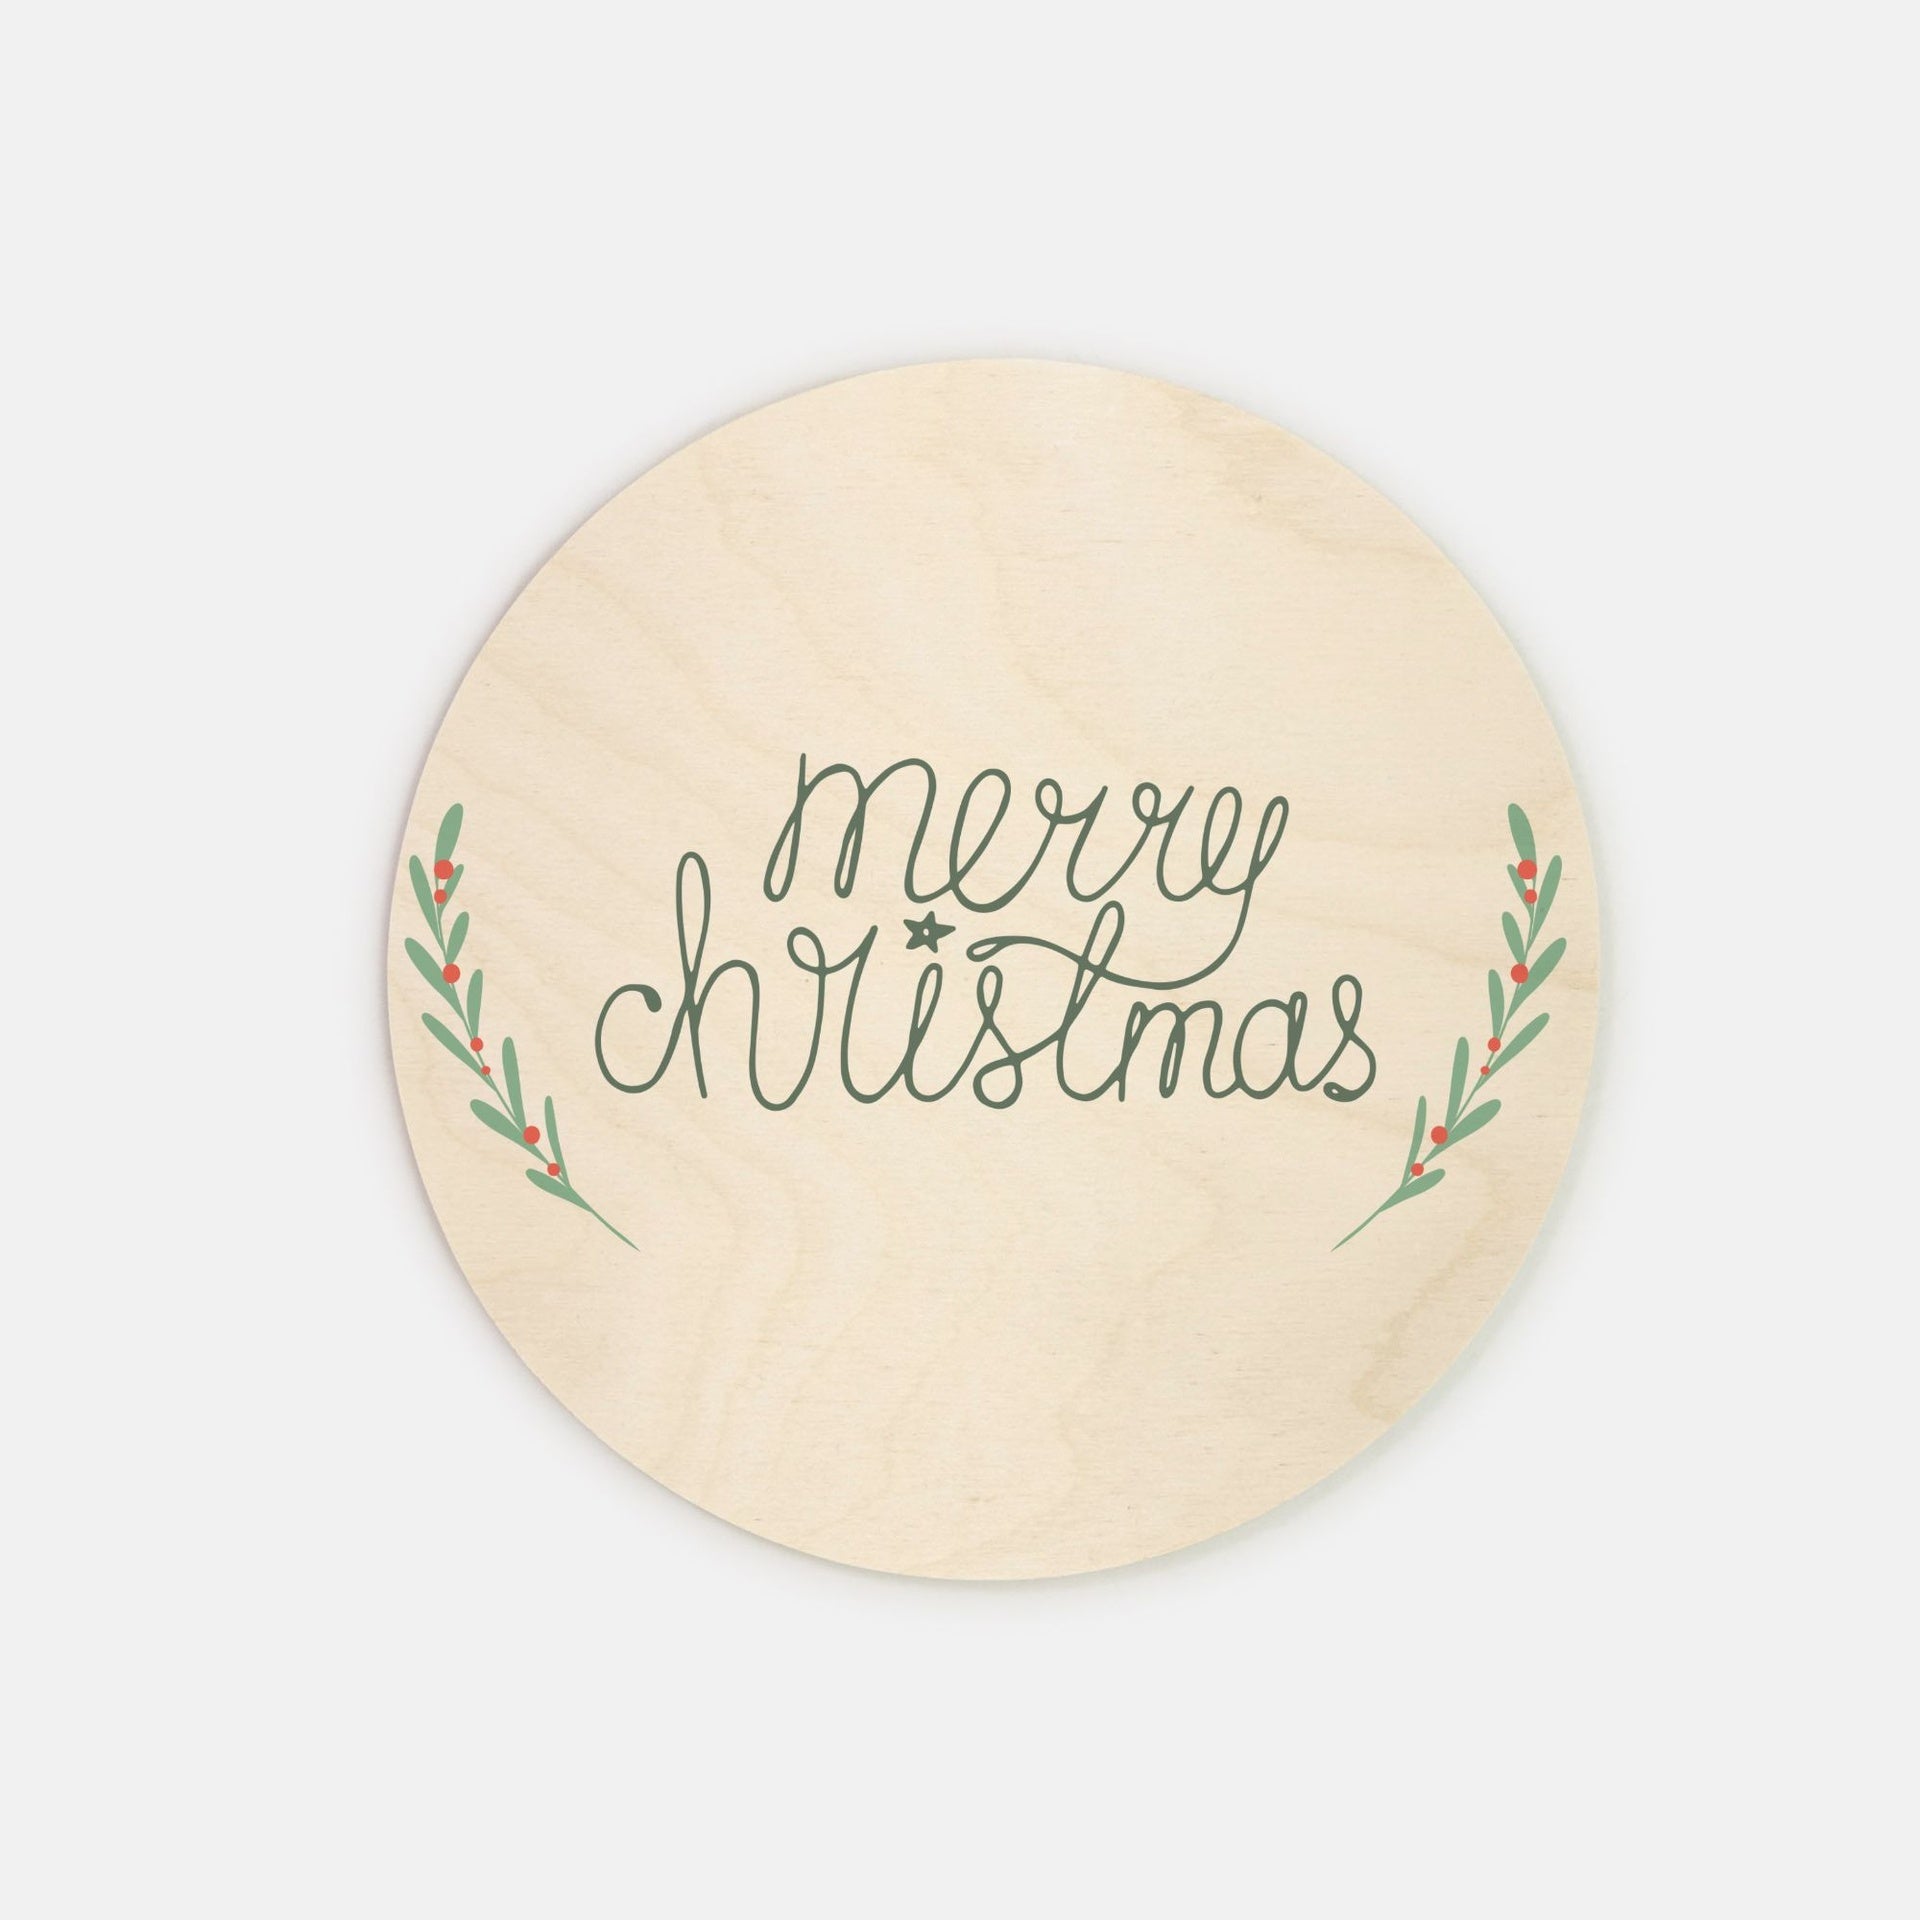 8" Round Wood Sign - Merry Christmas